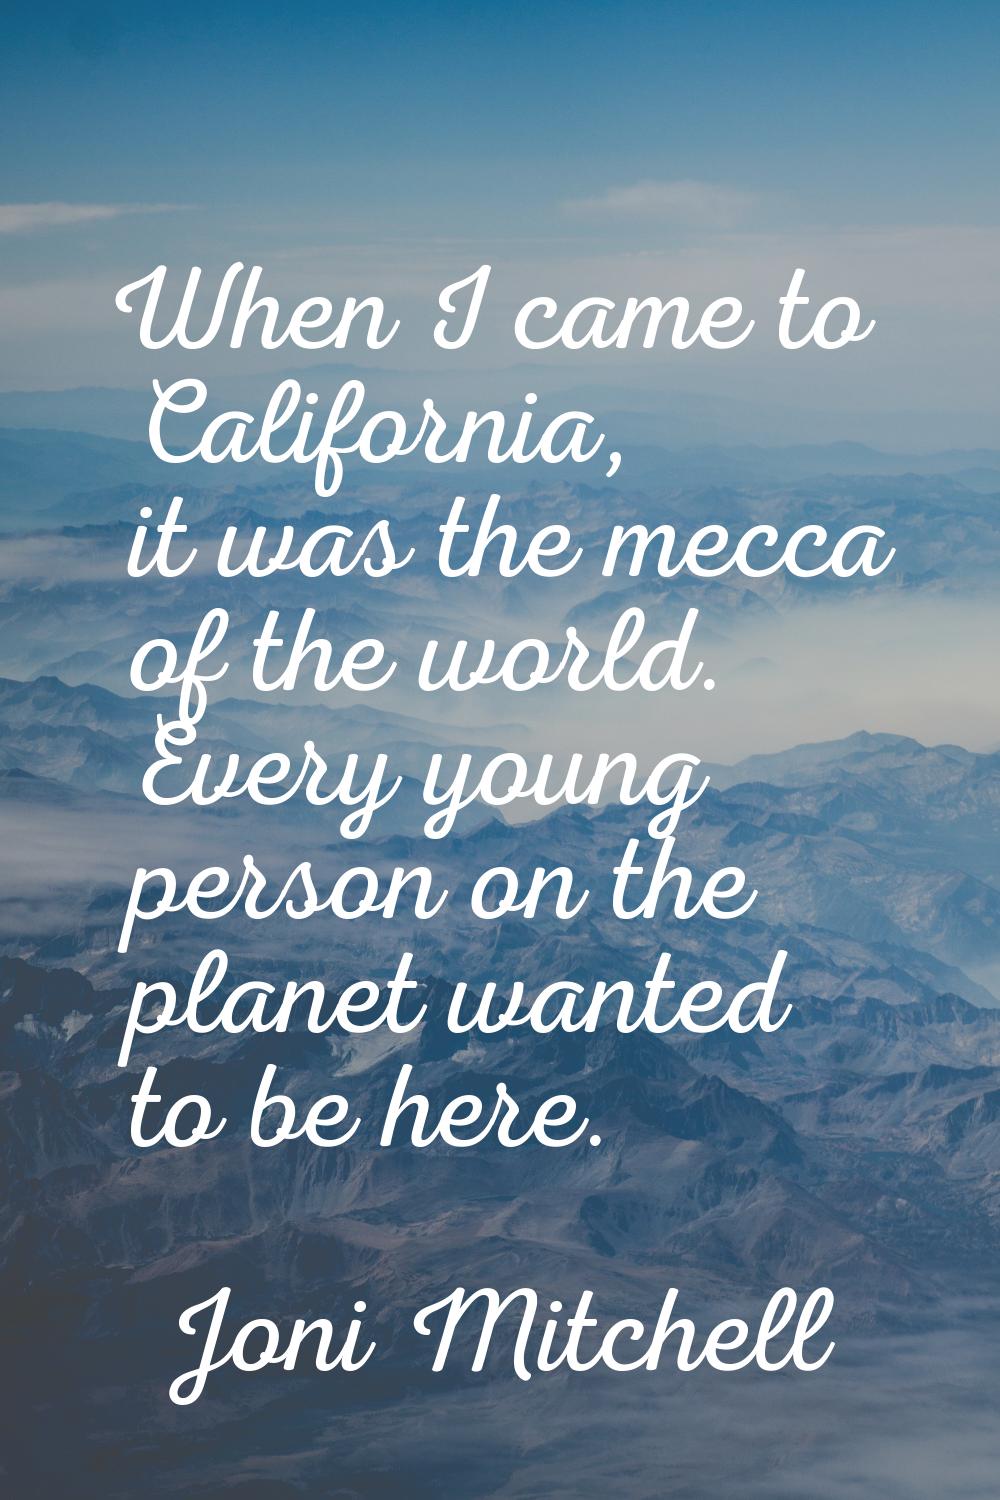 When I came to California, it was the mecca of the world. Every young person on the planet wanted t